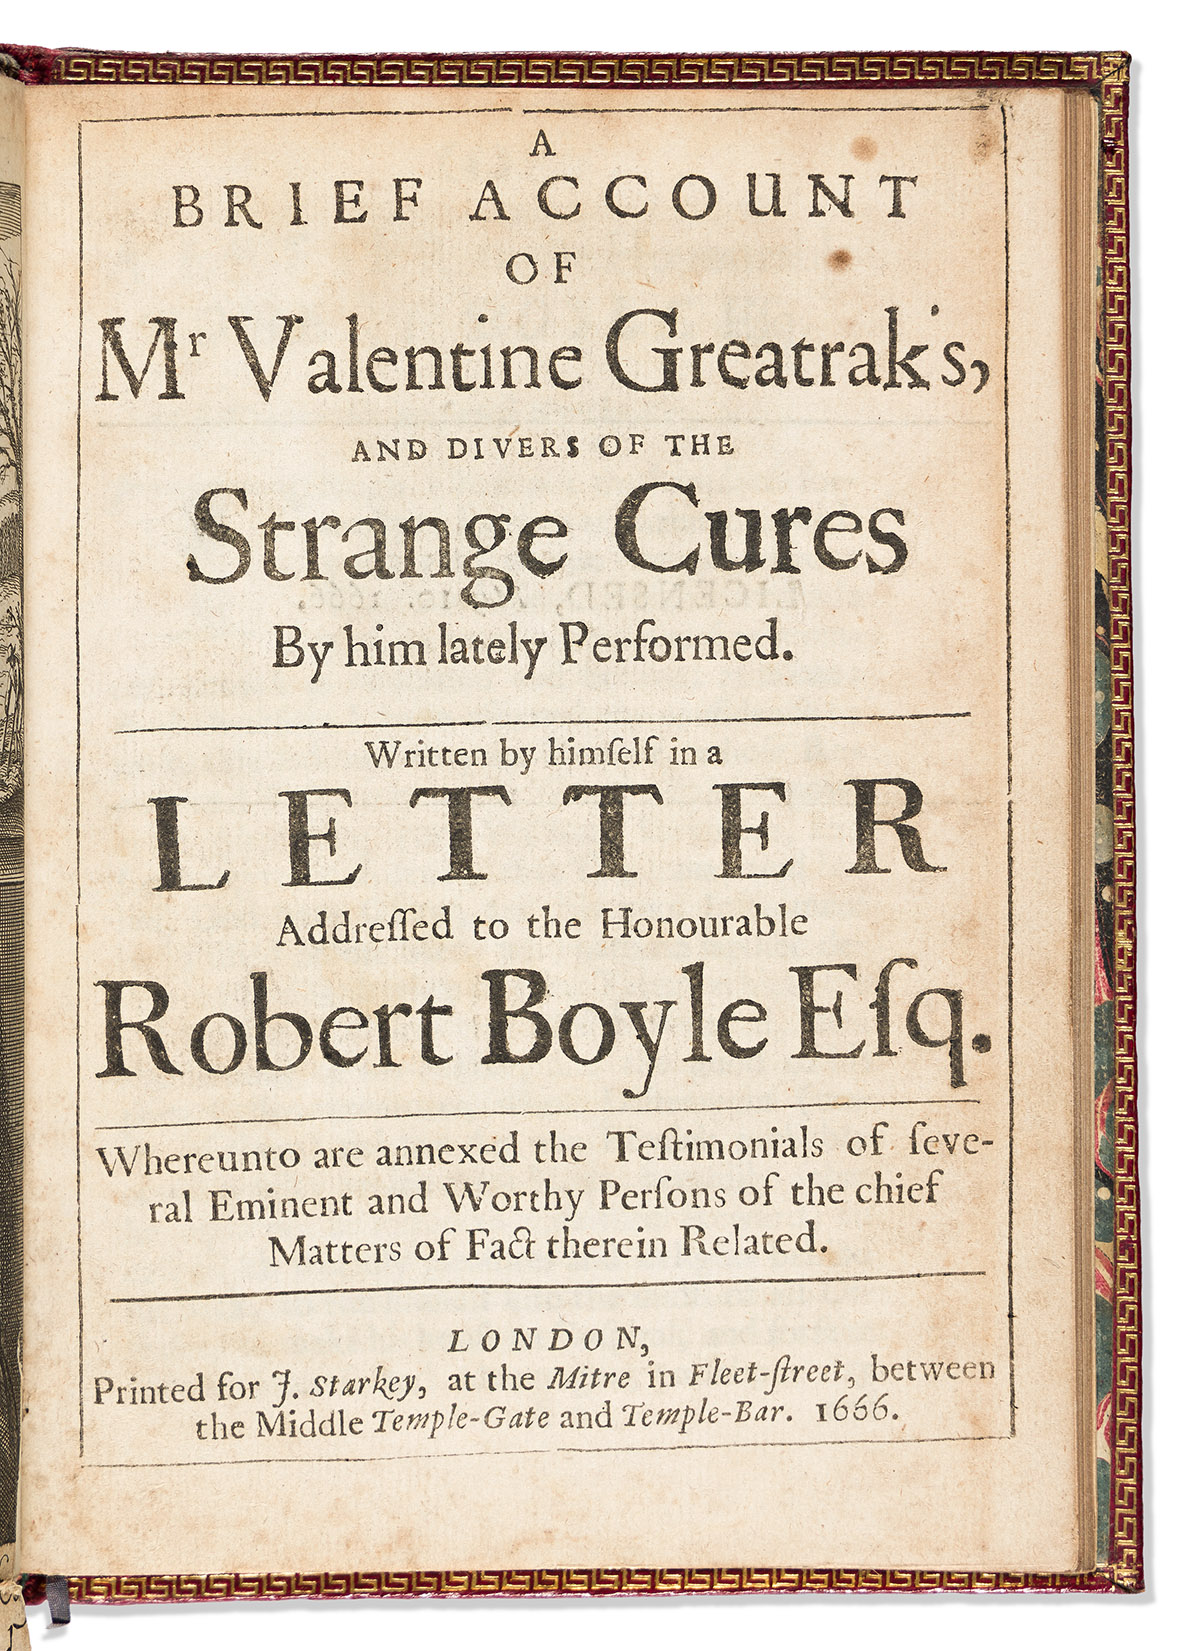 Greatrakes, Valentine (1629-1683) A Brief Account of Mr. Valentine Greatraks, and Divers of the Strange Cures by him lately Performed.